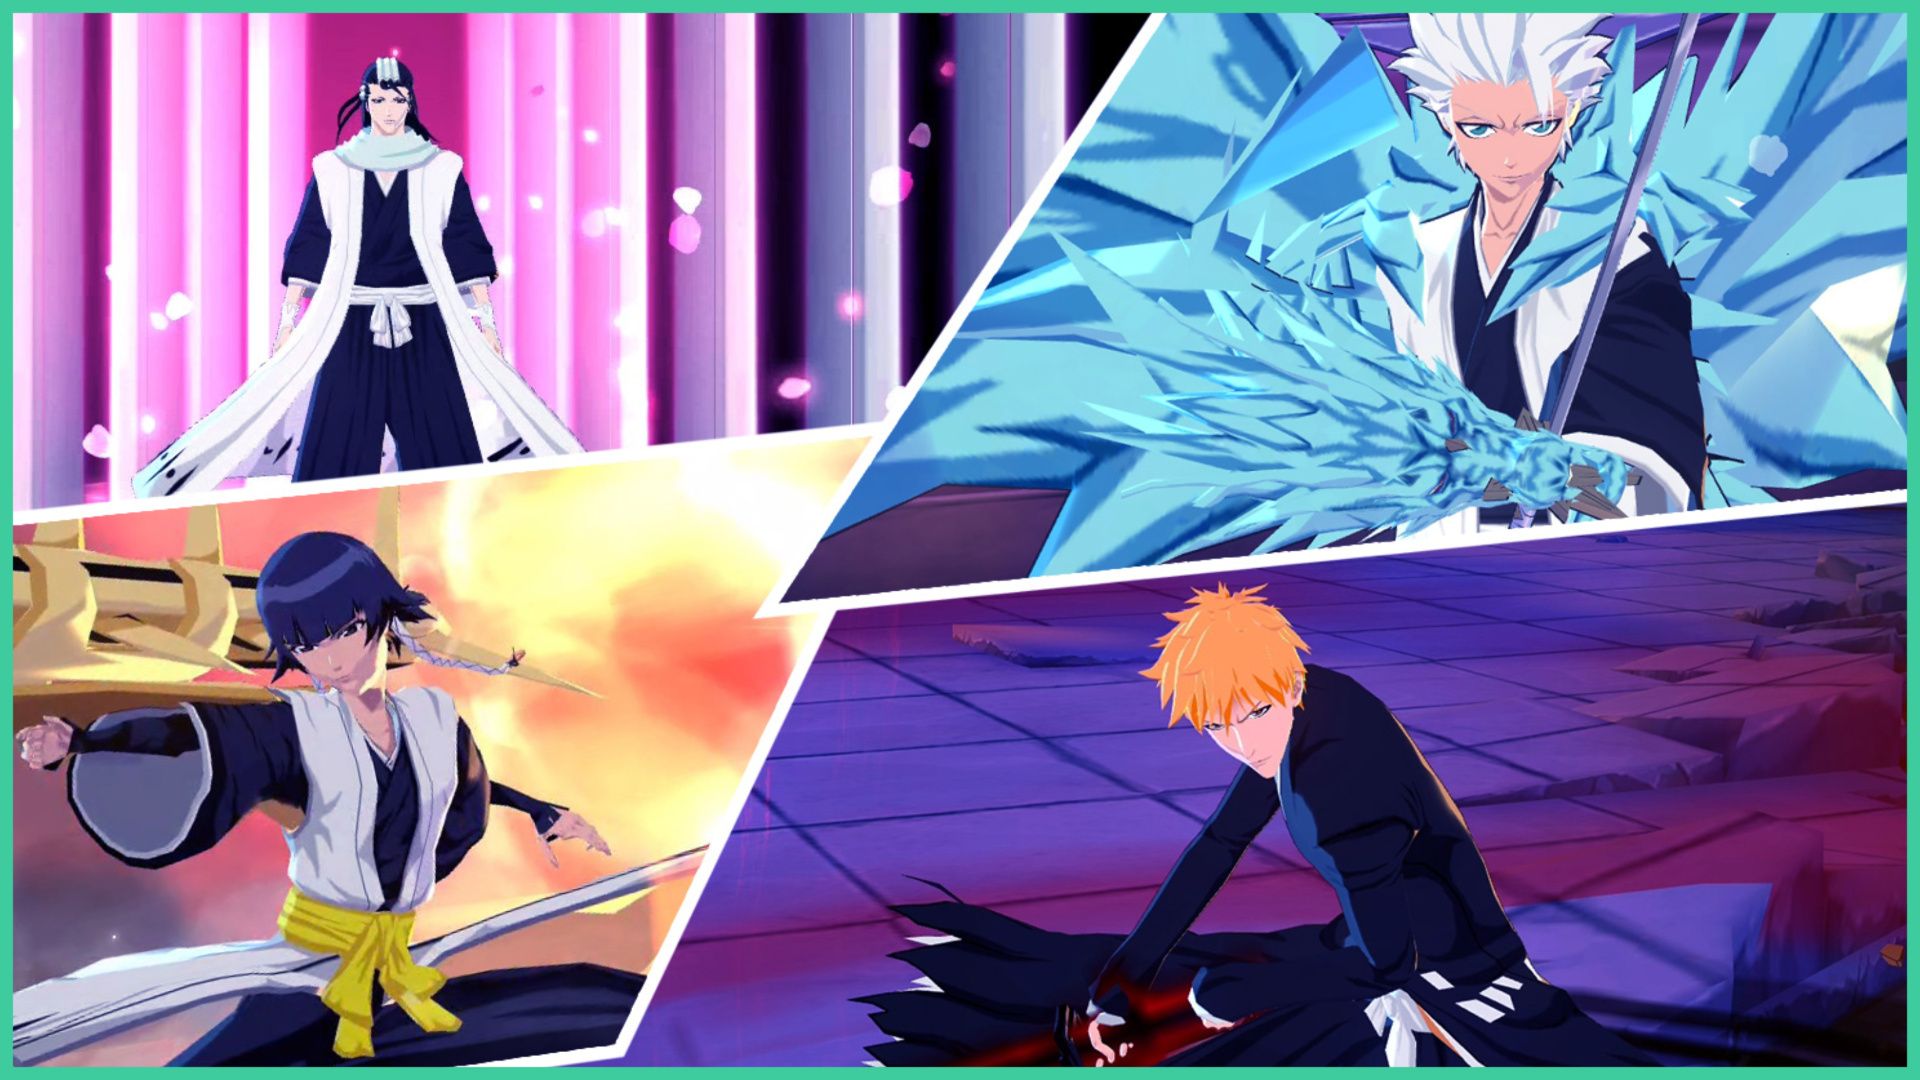 feature image for our bleach soul reaper reroll guide, the image features 4 characters from the game and series, with 3 of them preparing for battle, with each image split into different fragments similar to a comic book